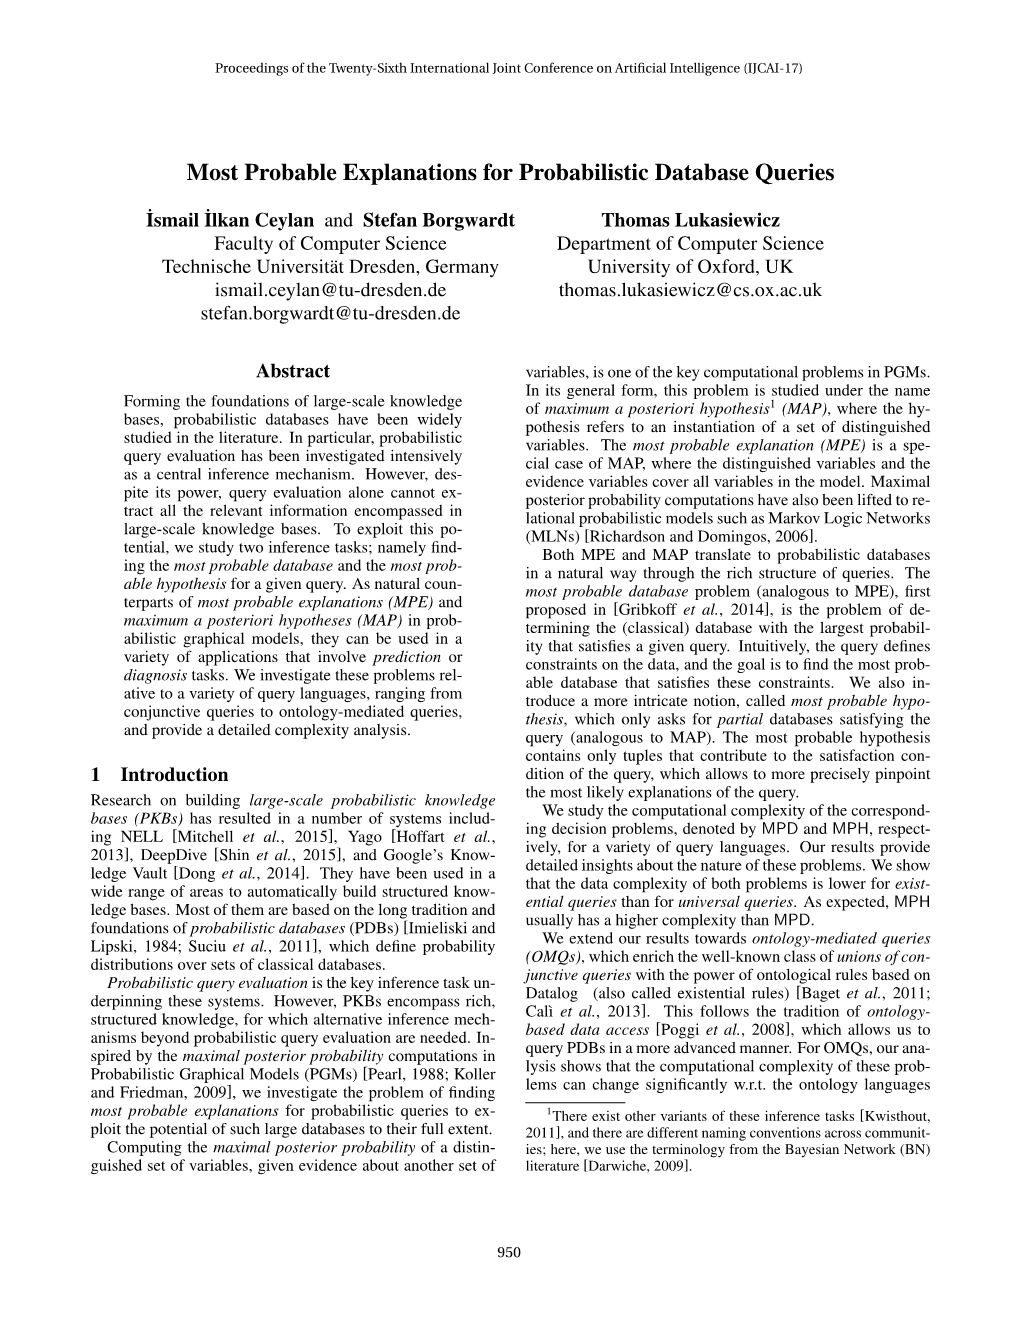 Most Probable Explanations for Probabilistic Database Queries